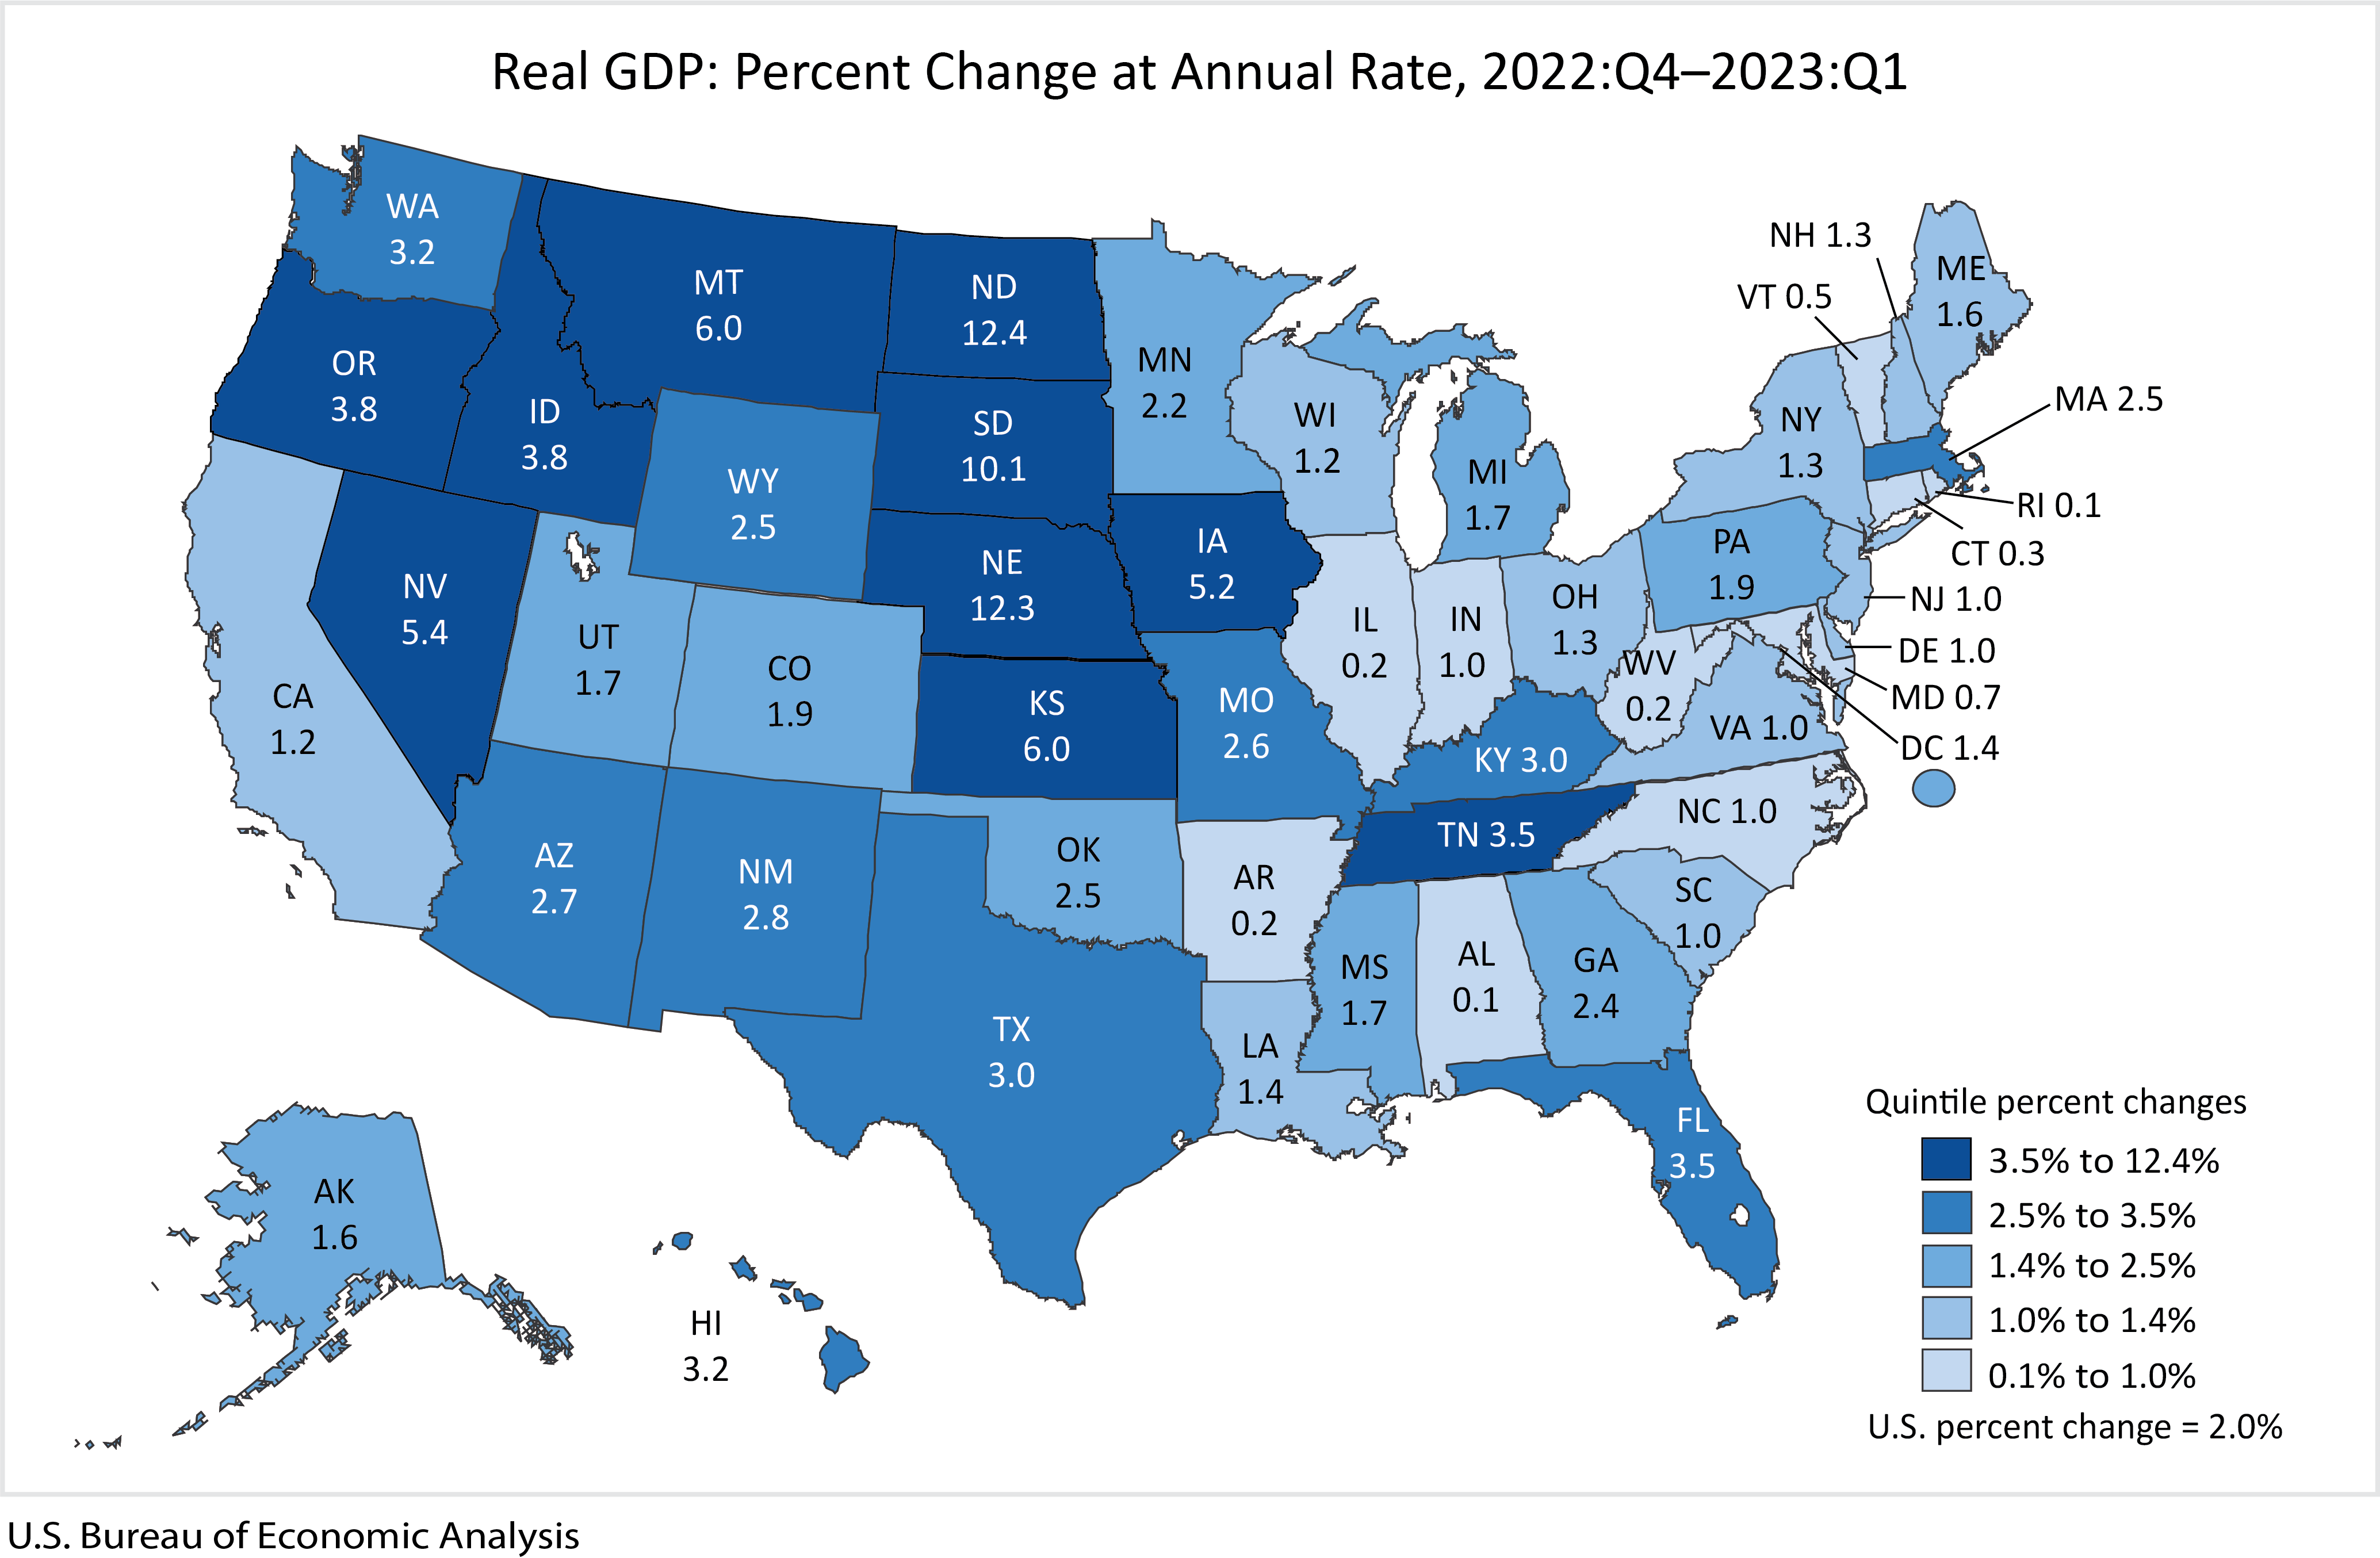 Real GDP: Percent Change at Annual Rate, 2022:Q4-2023:Q1